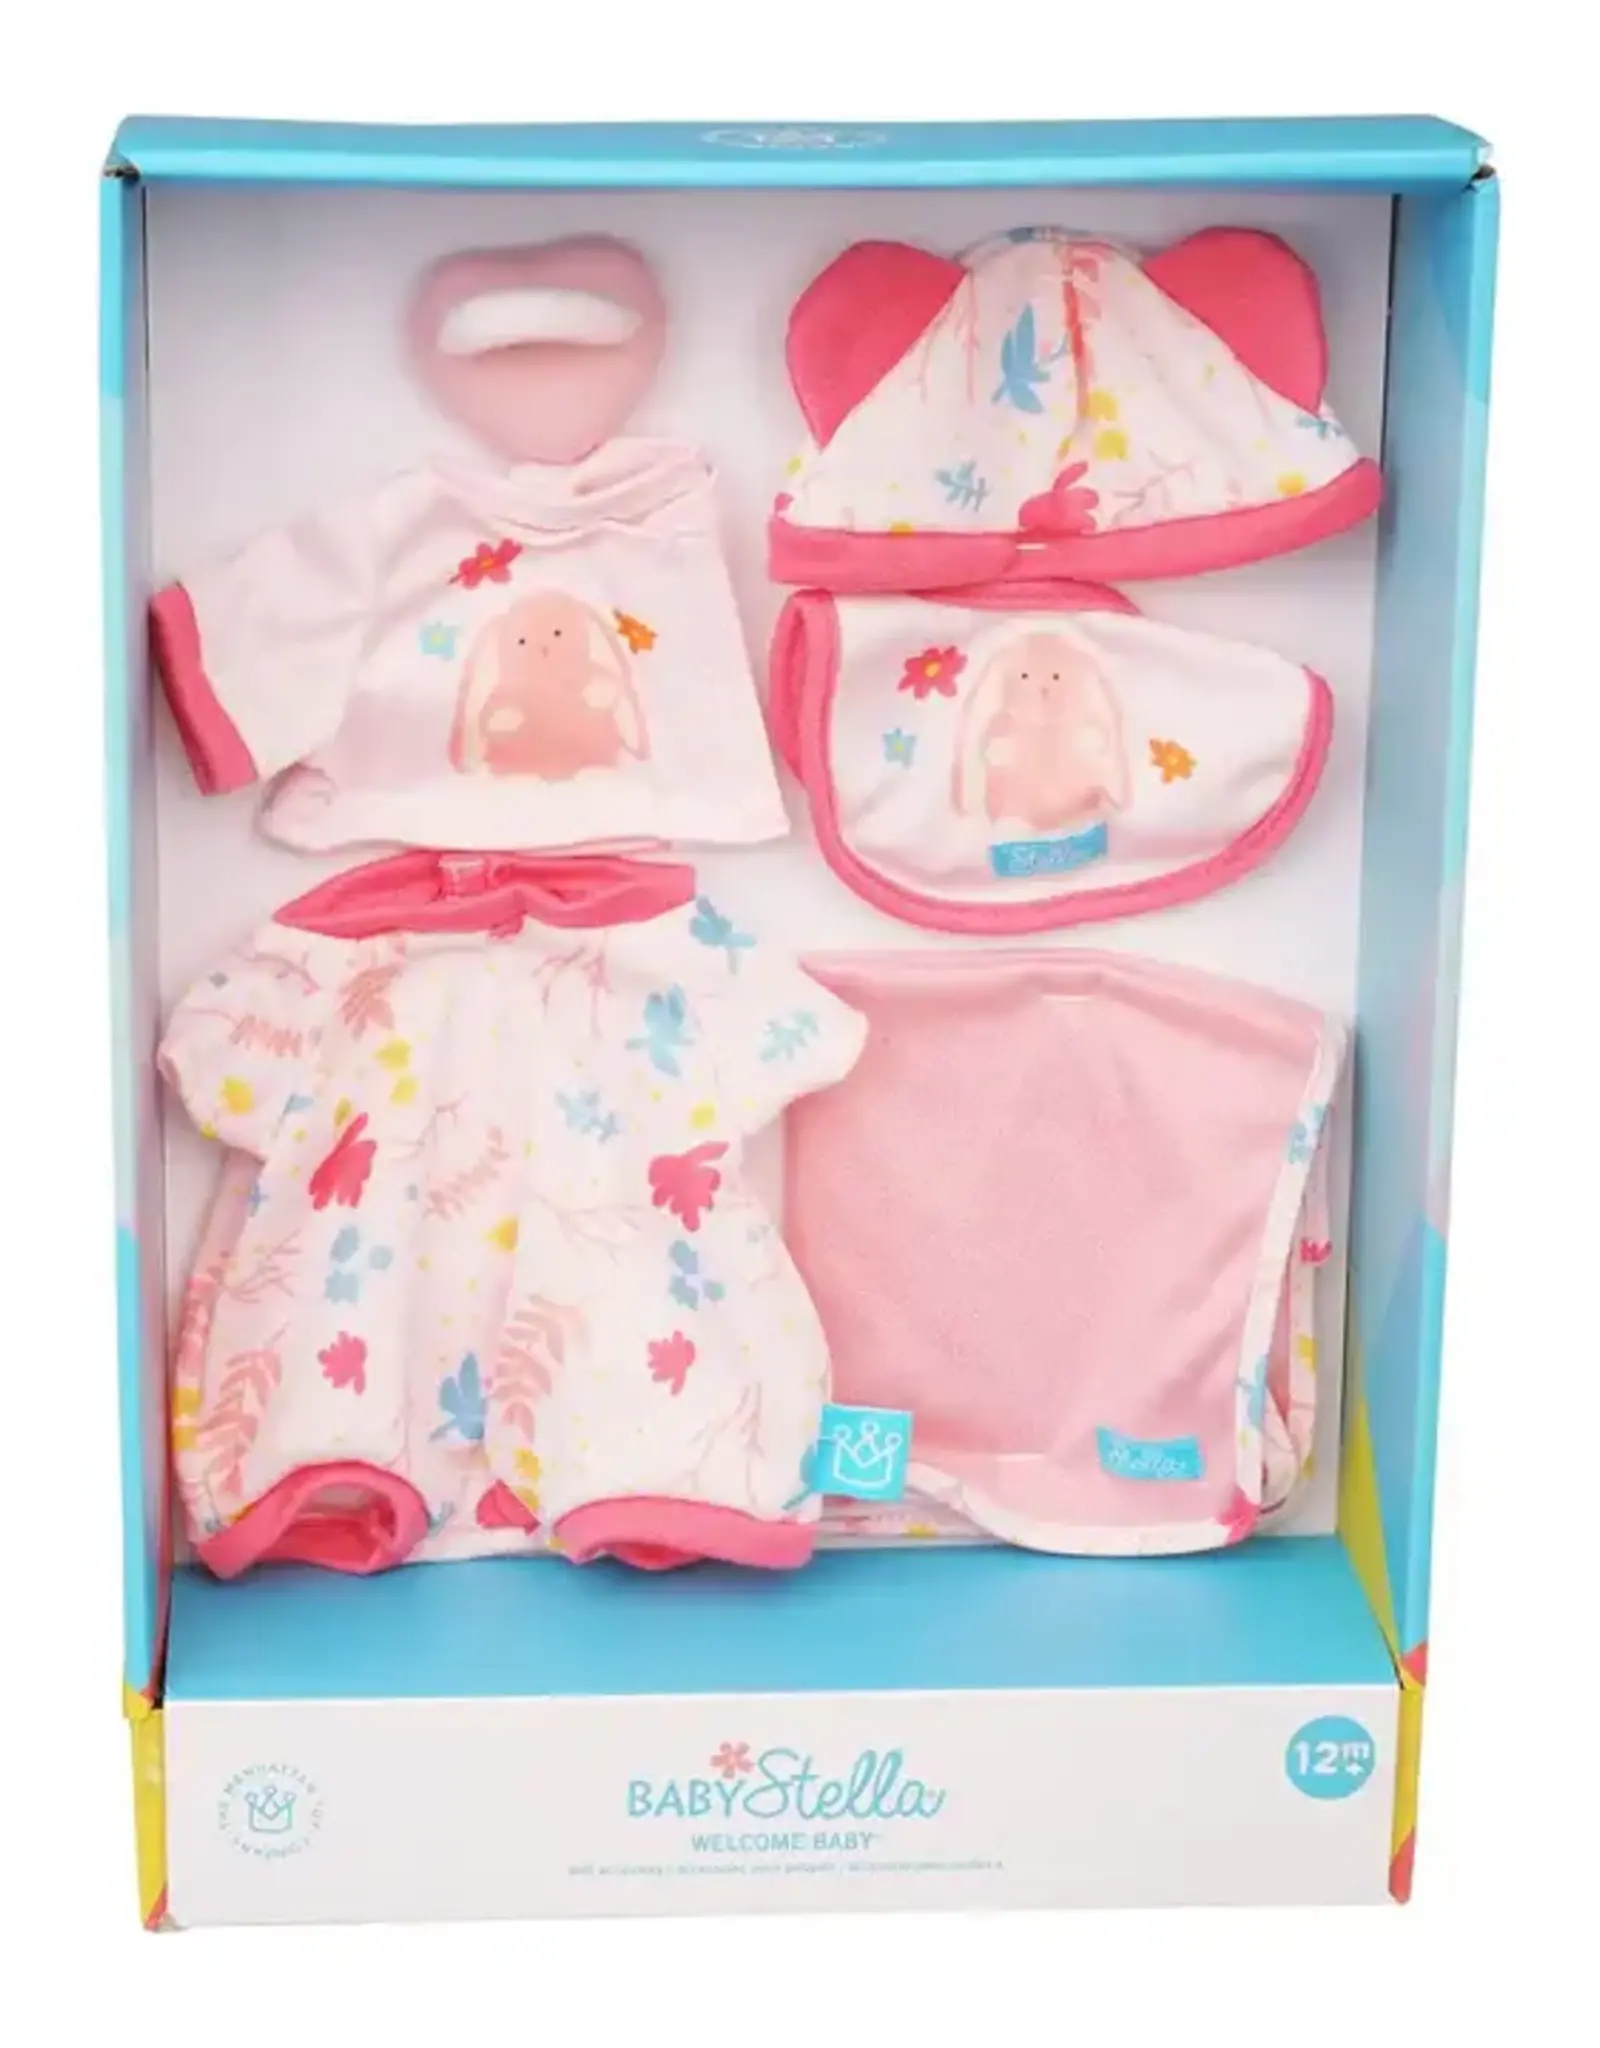 MANHATTAN TOY COMPANY Baby Stella Welcome Baby